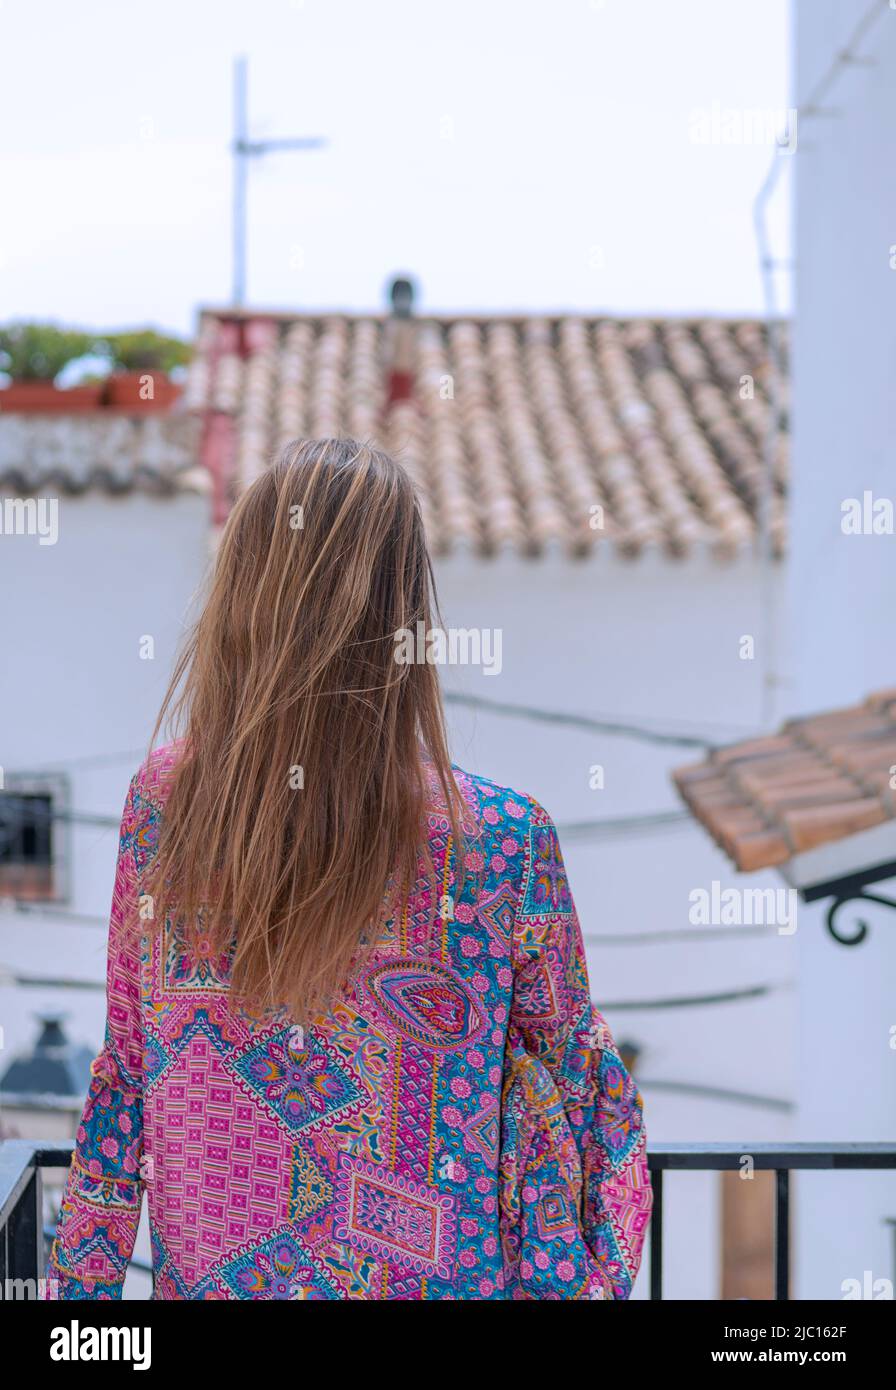 blonde woman seen from behind on balcony overlooking rural village street Stock Photo